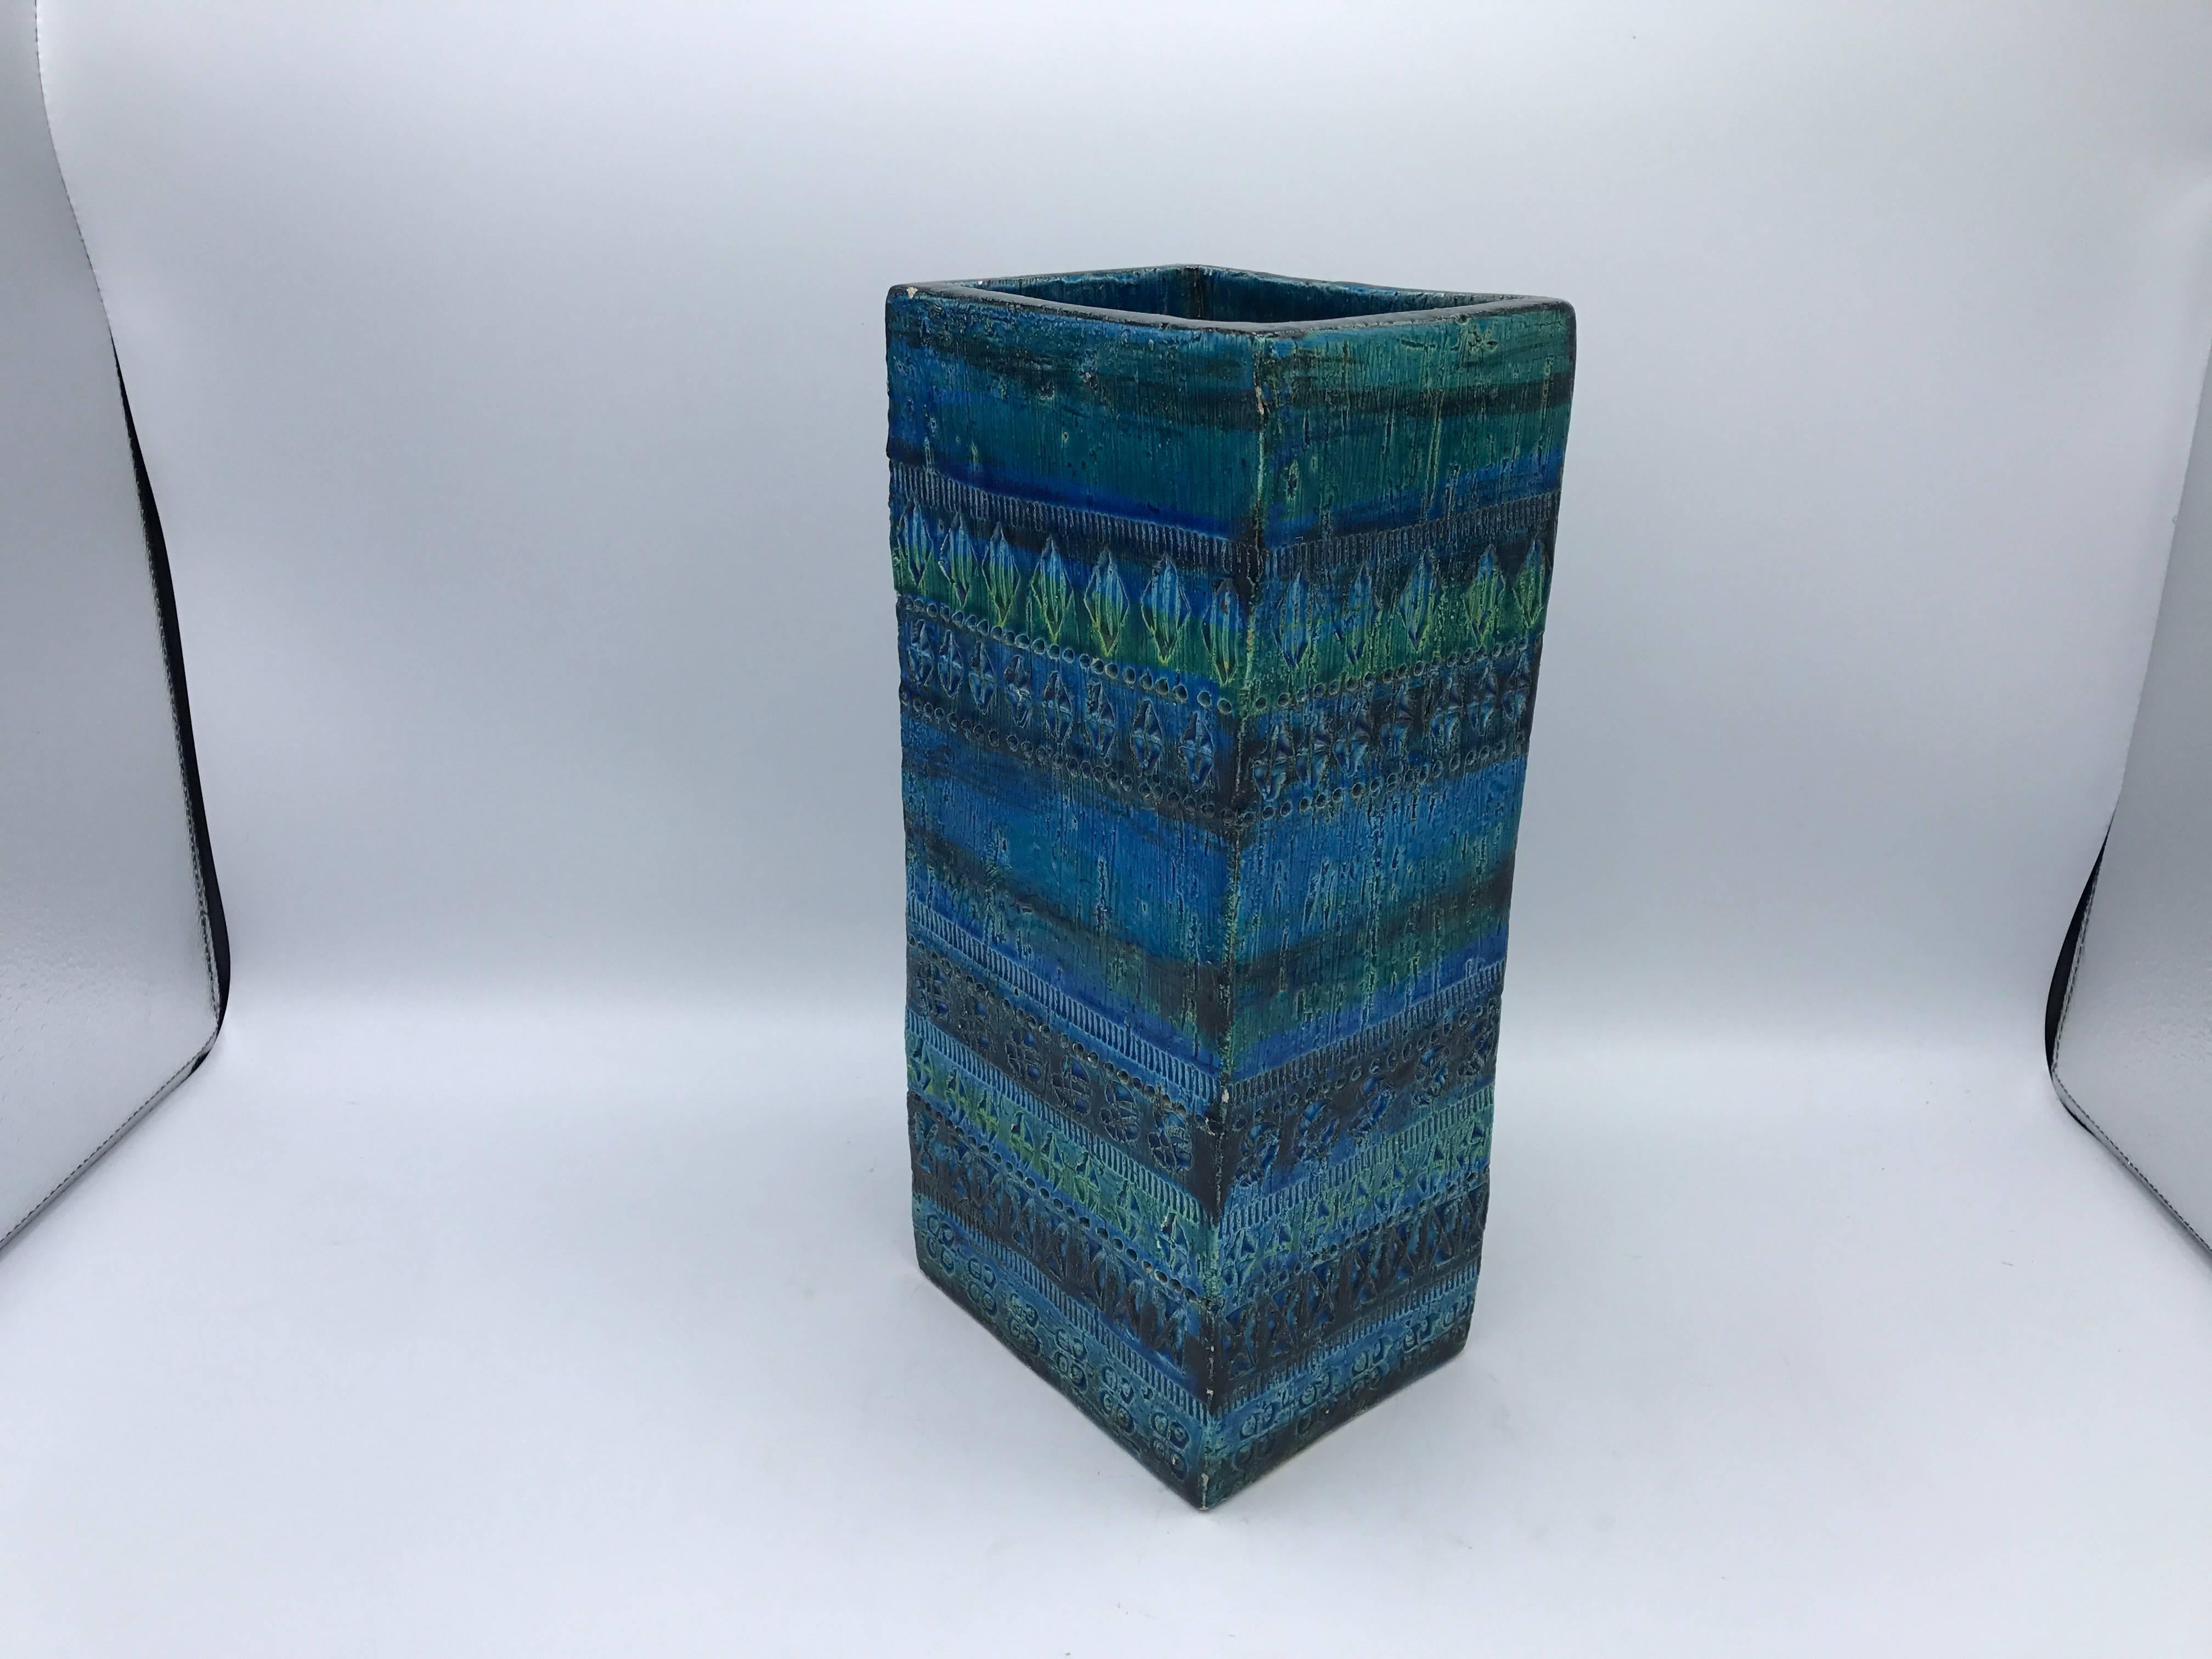 Offered is an extraordinary, large, 1960s Aldo Londi for Bitossi, Italy Rimini blue rectangular pottery vase cachepot. Holds water. Can easily convert into a lamp. Marked 'Italy' on underside. Notice, small chip along bottom, see image #7.

